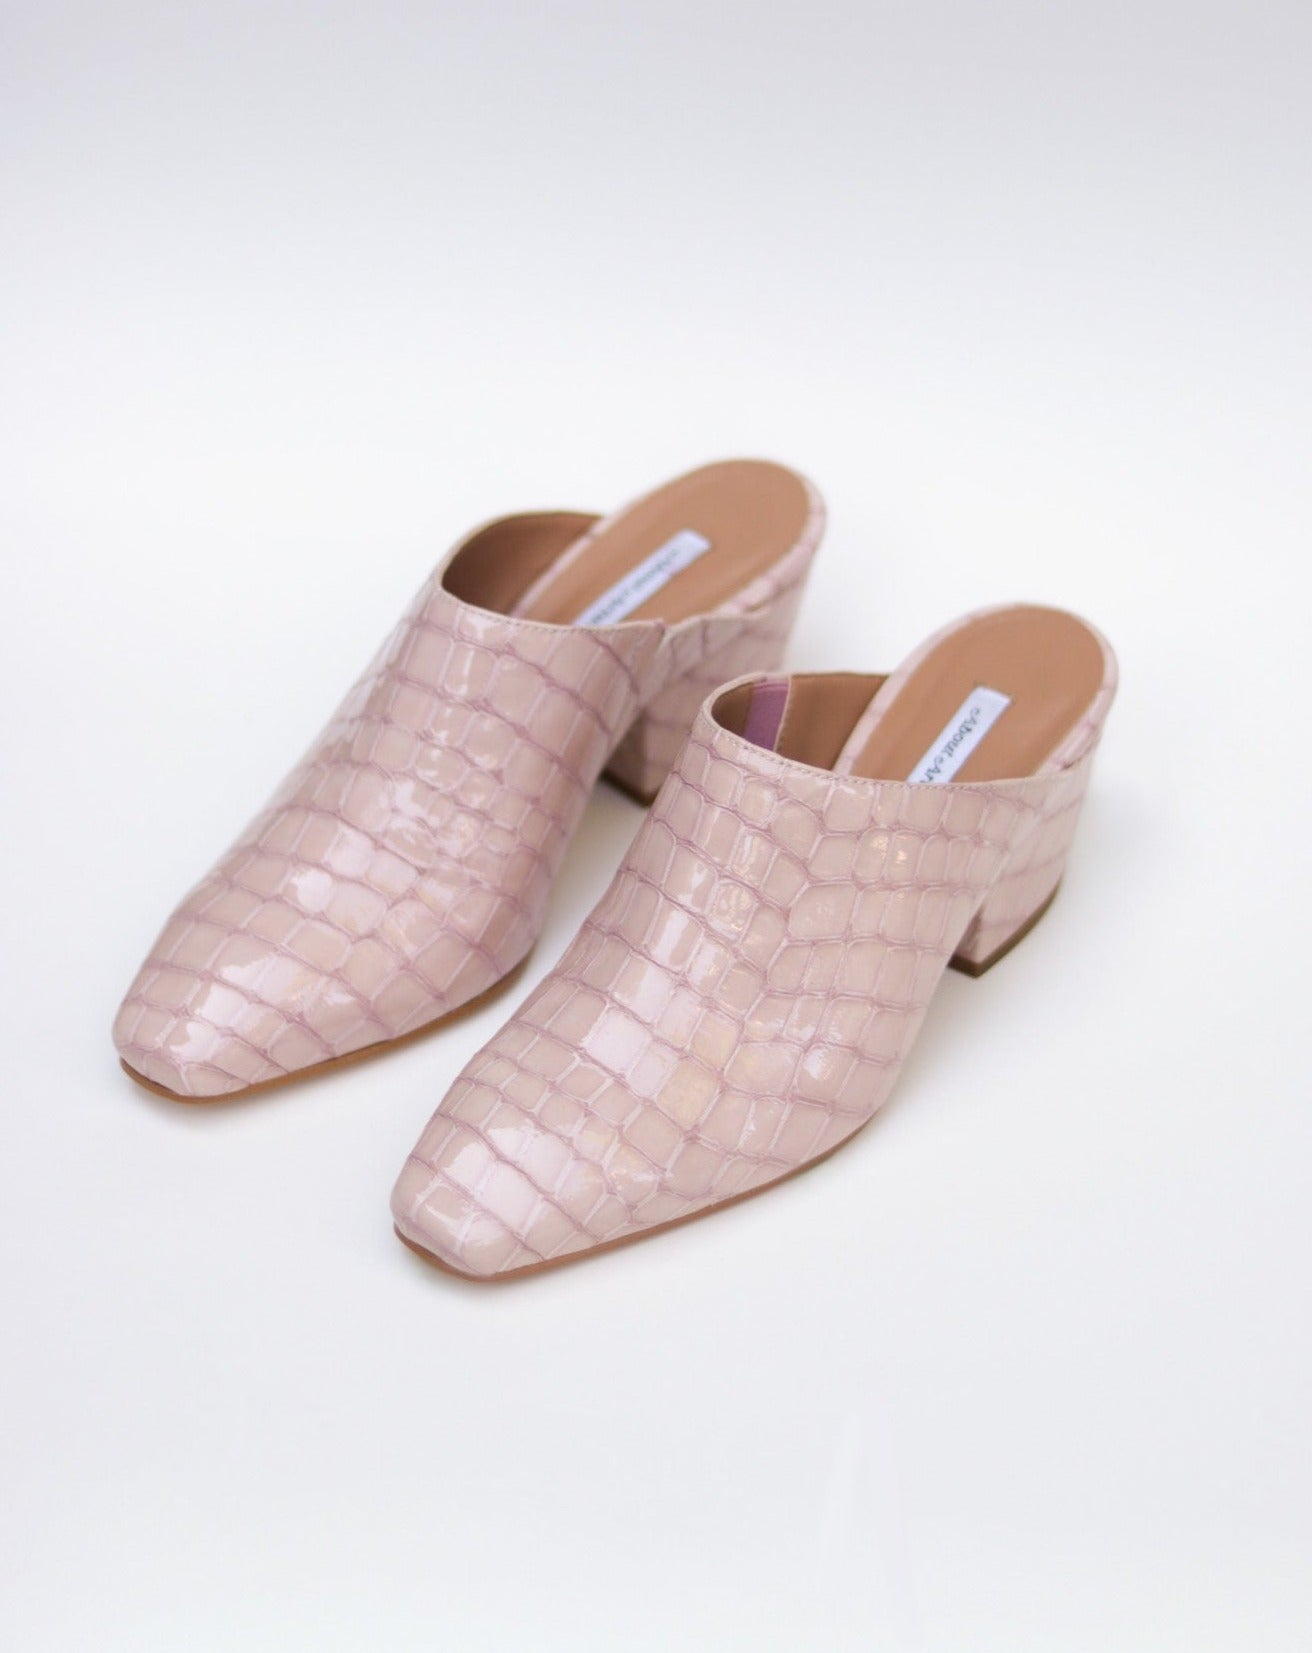 Pink 100% leather crocodile effect mules with almond shaped toe and block heel available at EASE Toronto